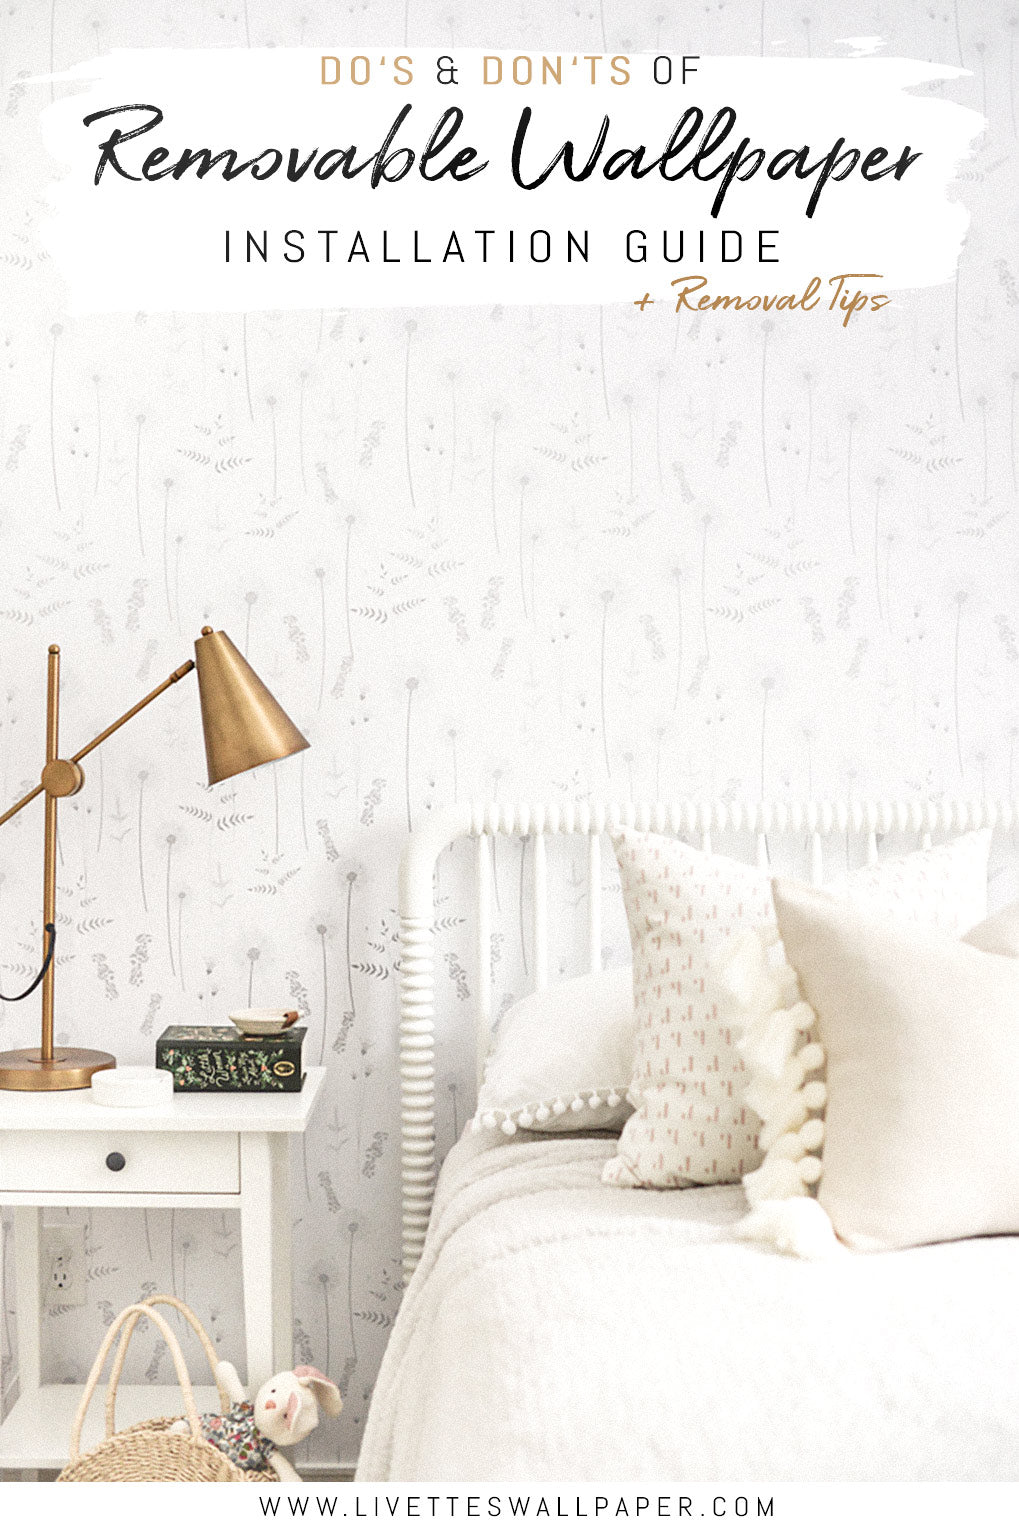 How to Hang Peel and Stick Wallpaper - my favorite tips and tricks!